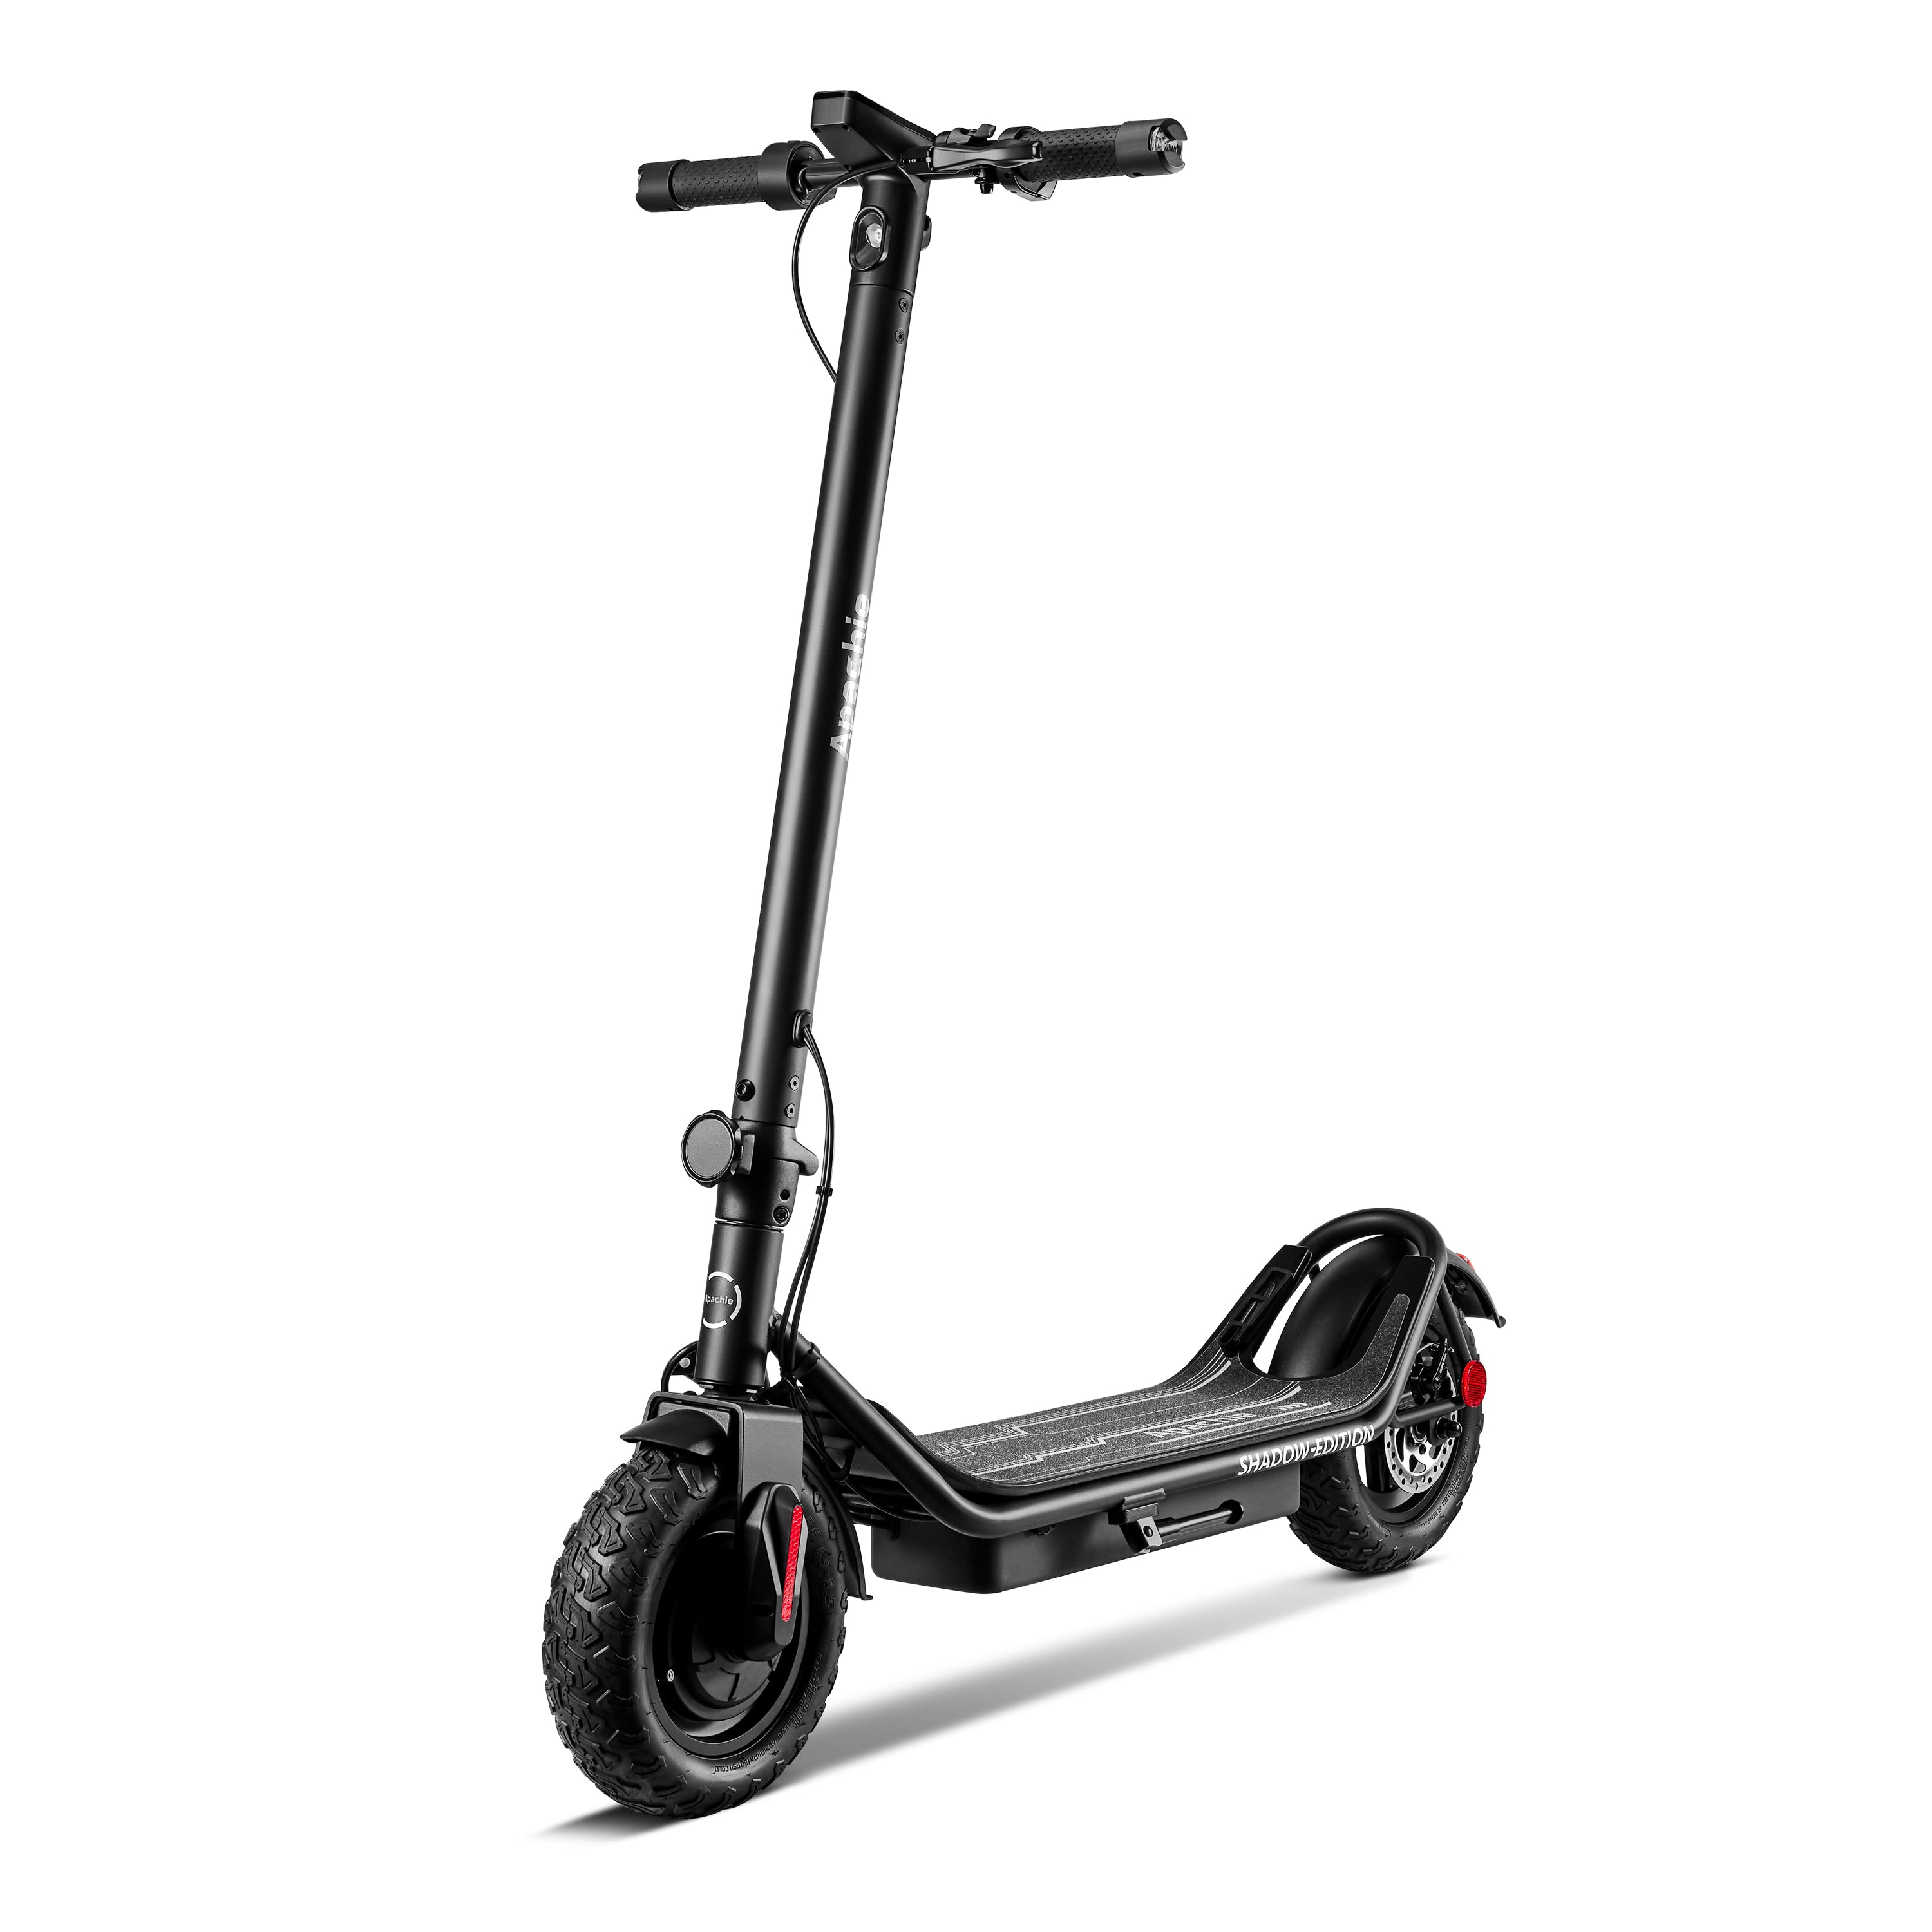 Apachie Shadow Edition 500W Electric Scooter